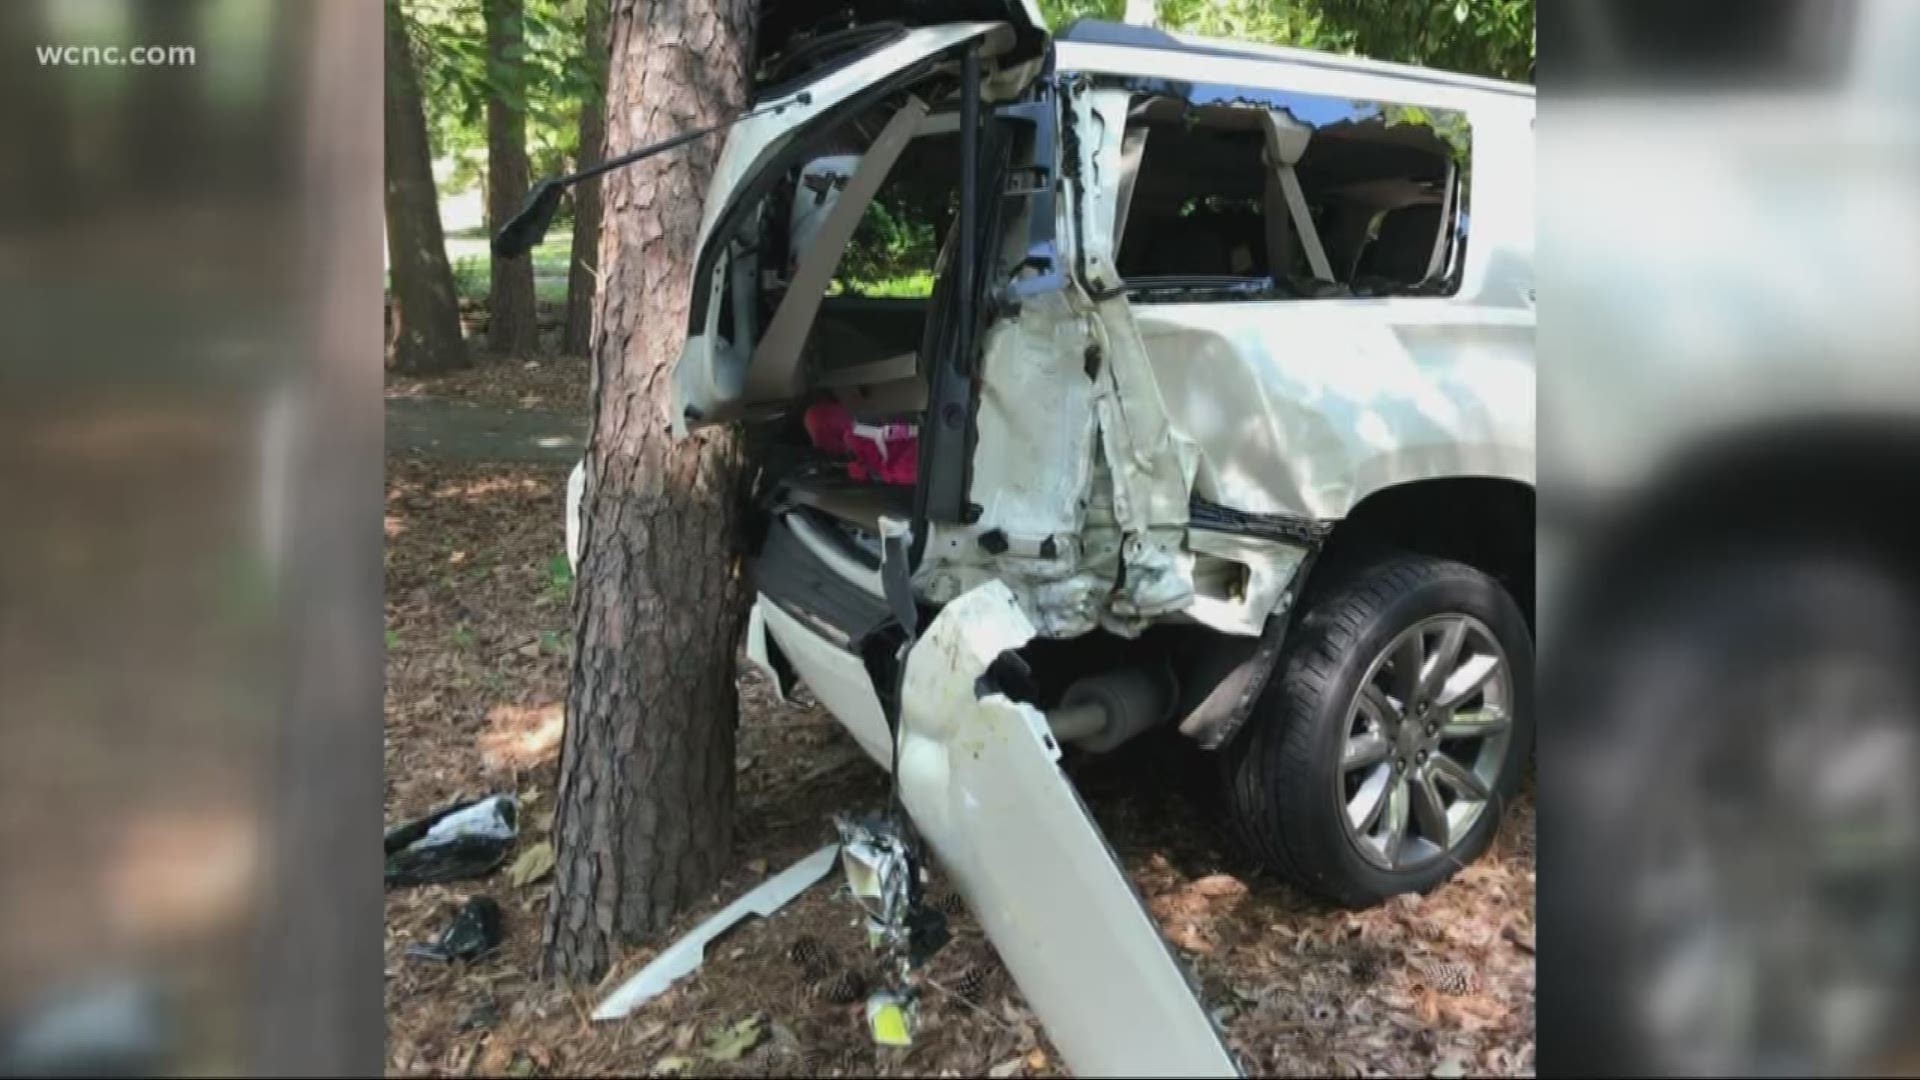 A Gastonia mother said her family's Chevy Suburban rolled backward down a hill with a 2-year-old inside, even though the car was off.